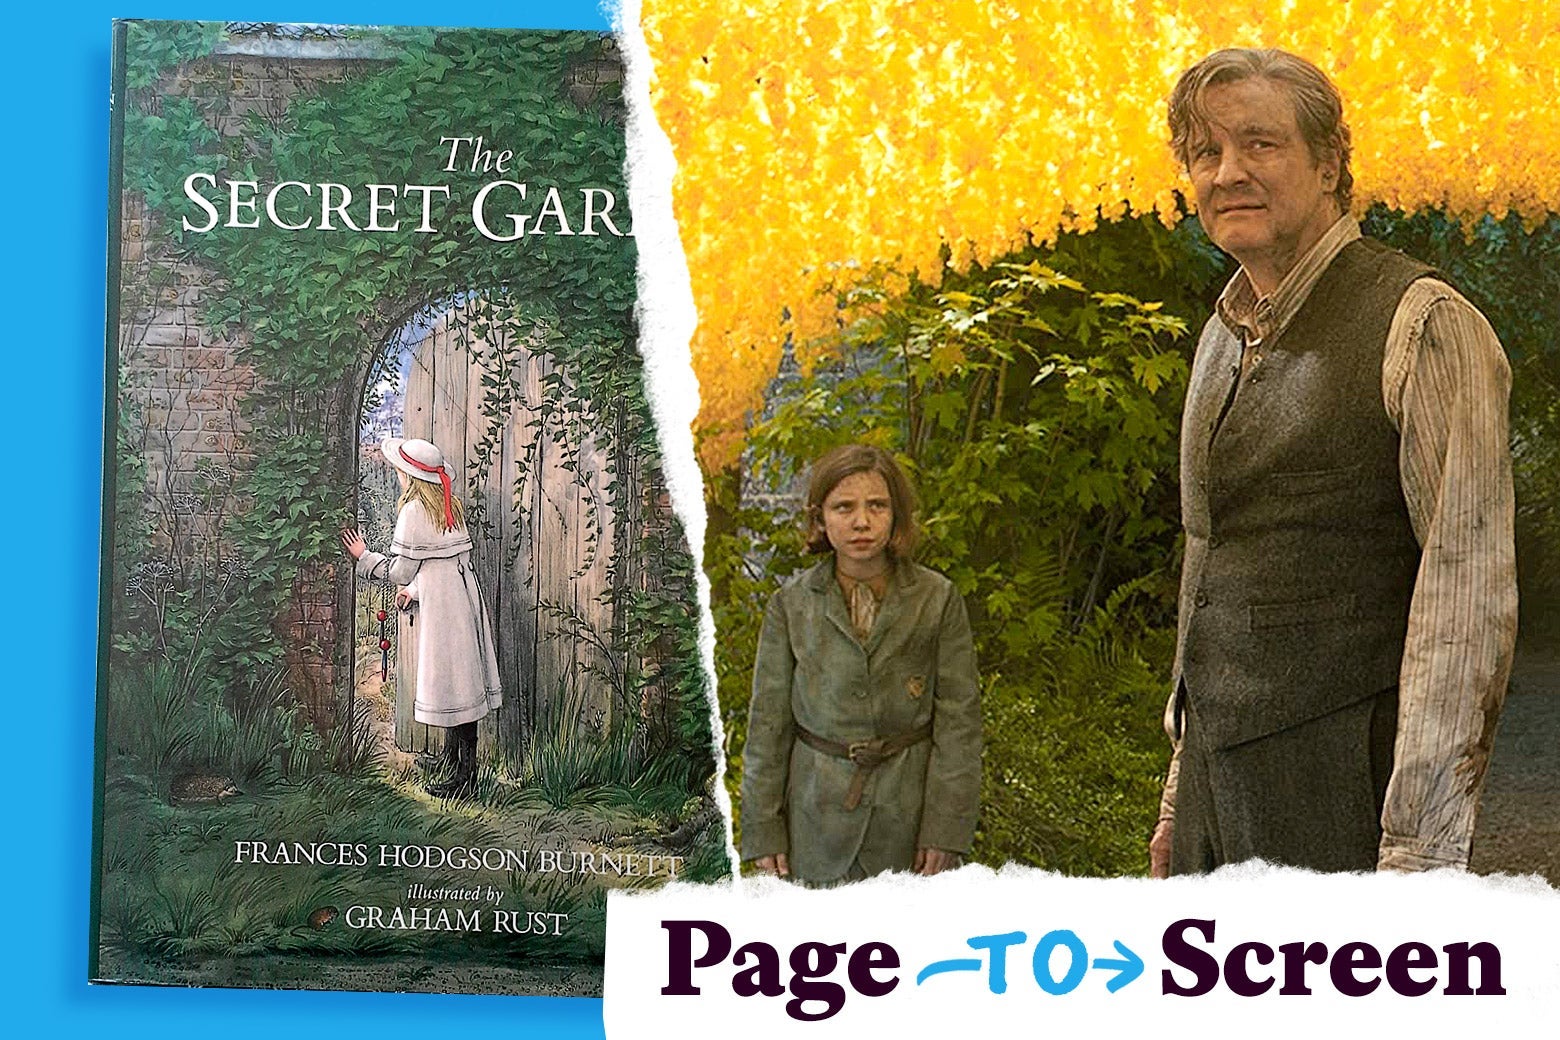 The Secret Garden book cover, and Colin Firth and Dixie Egerickx in a scene from the book's film adaptation